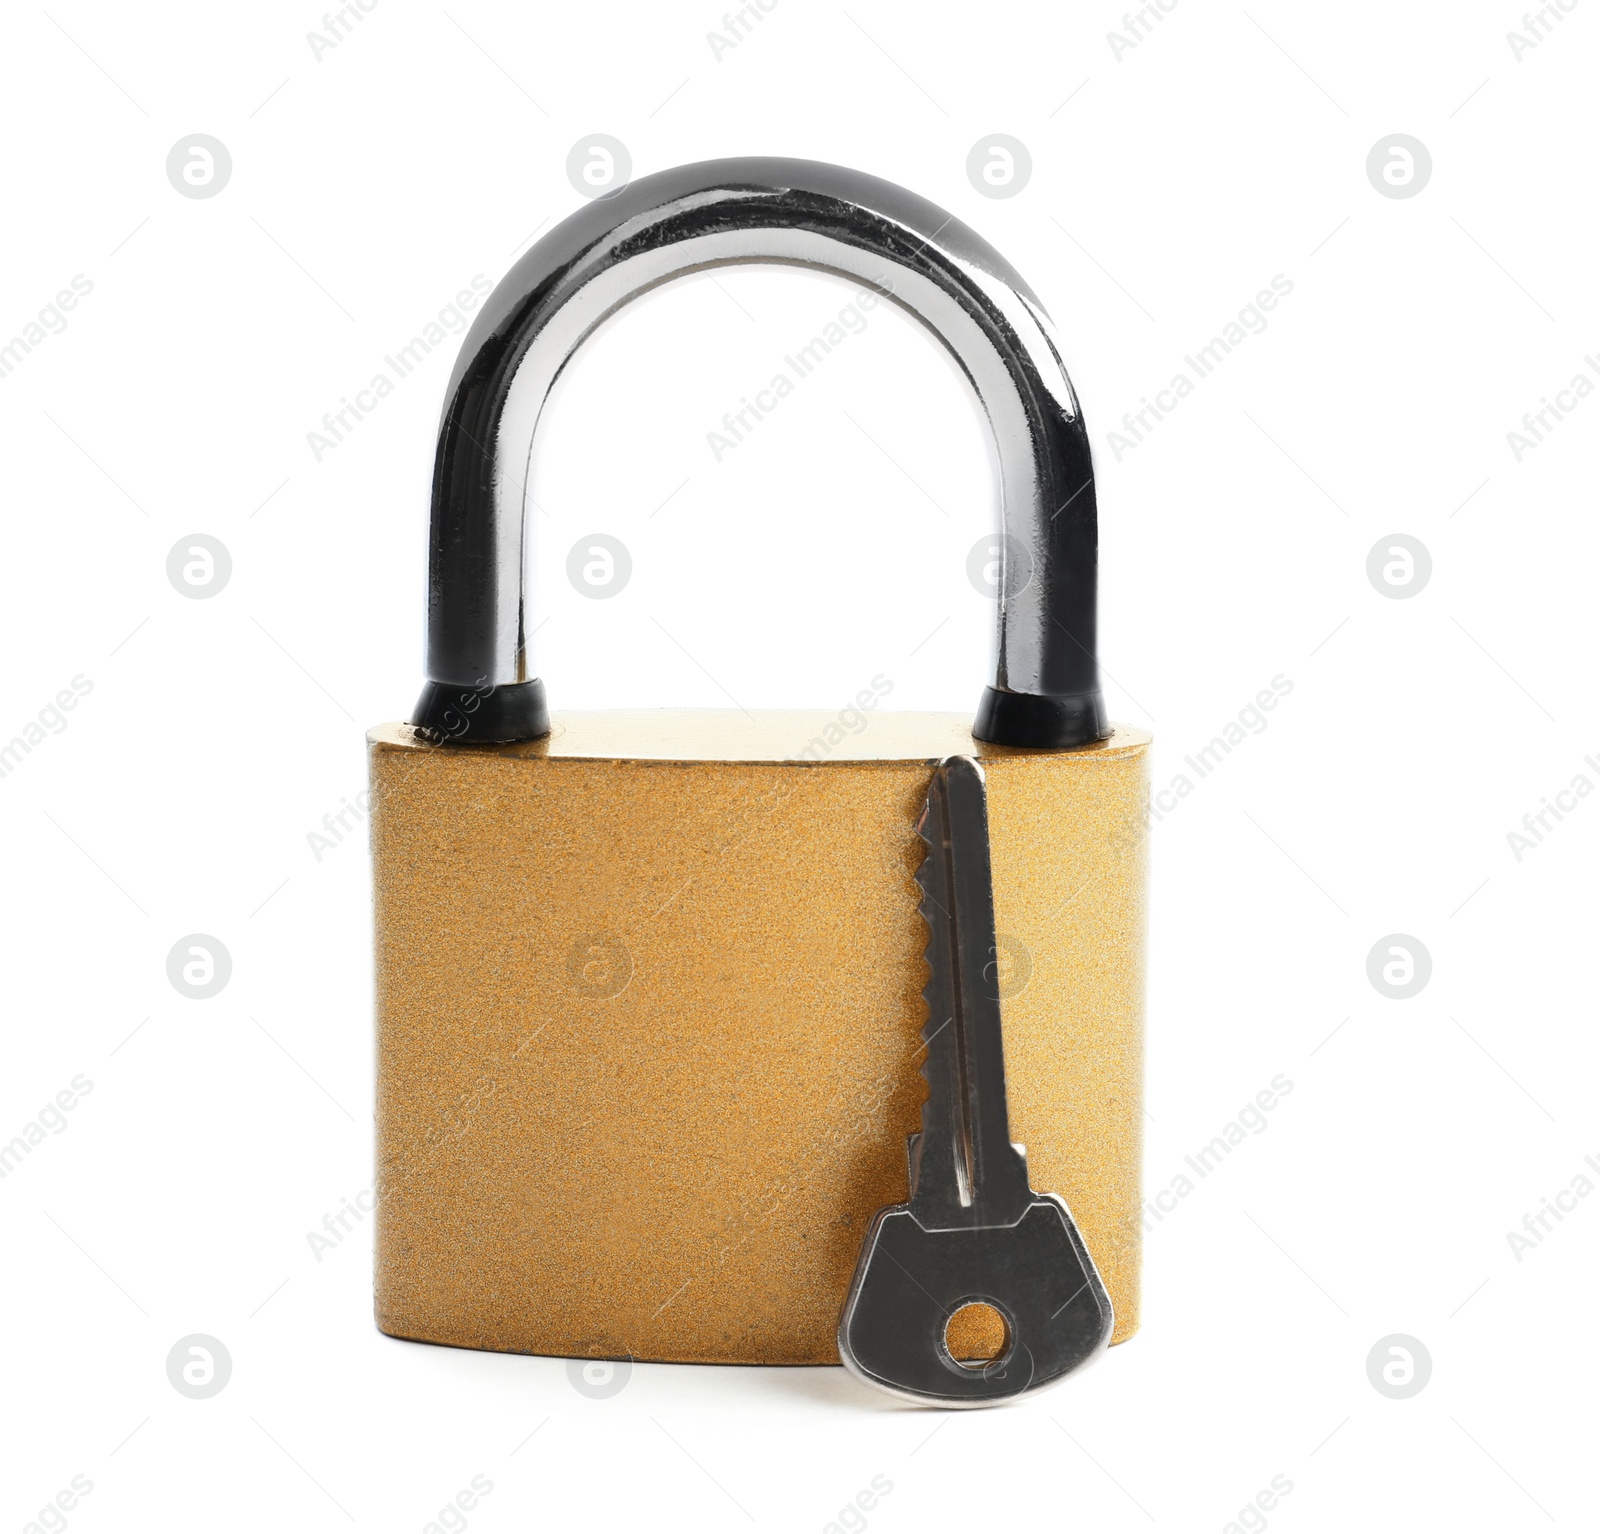 Photo of Steel padlock and key isolated on white. Safety concept